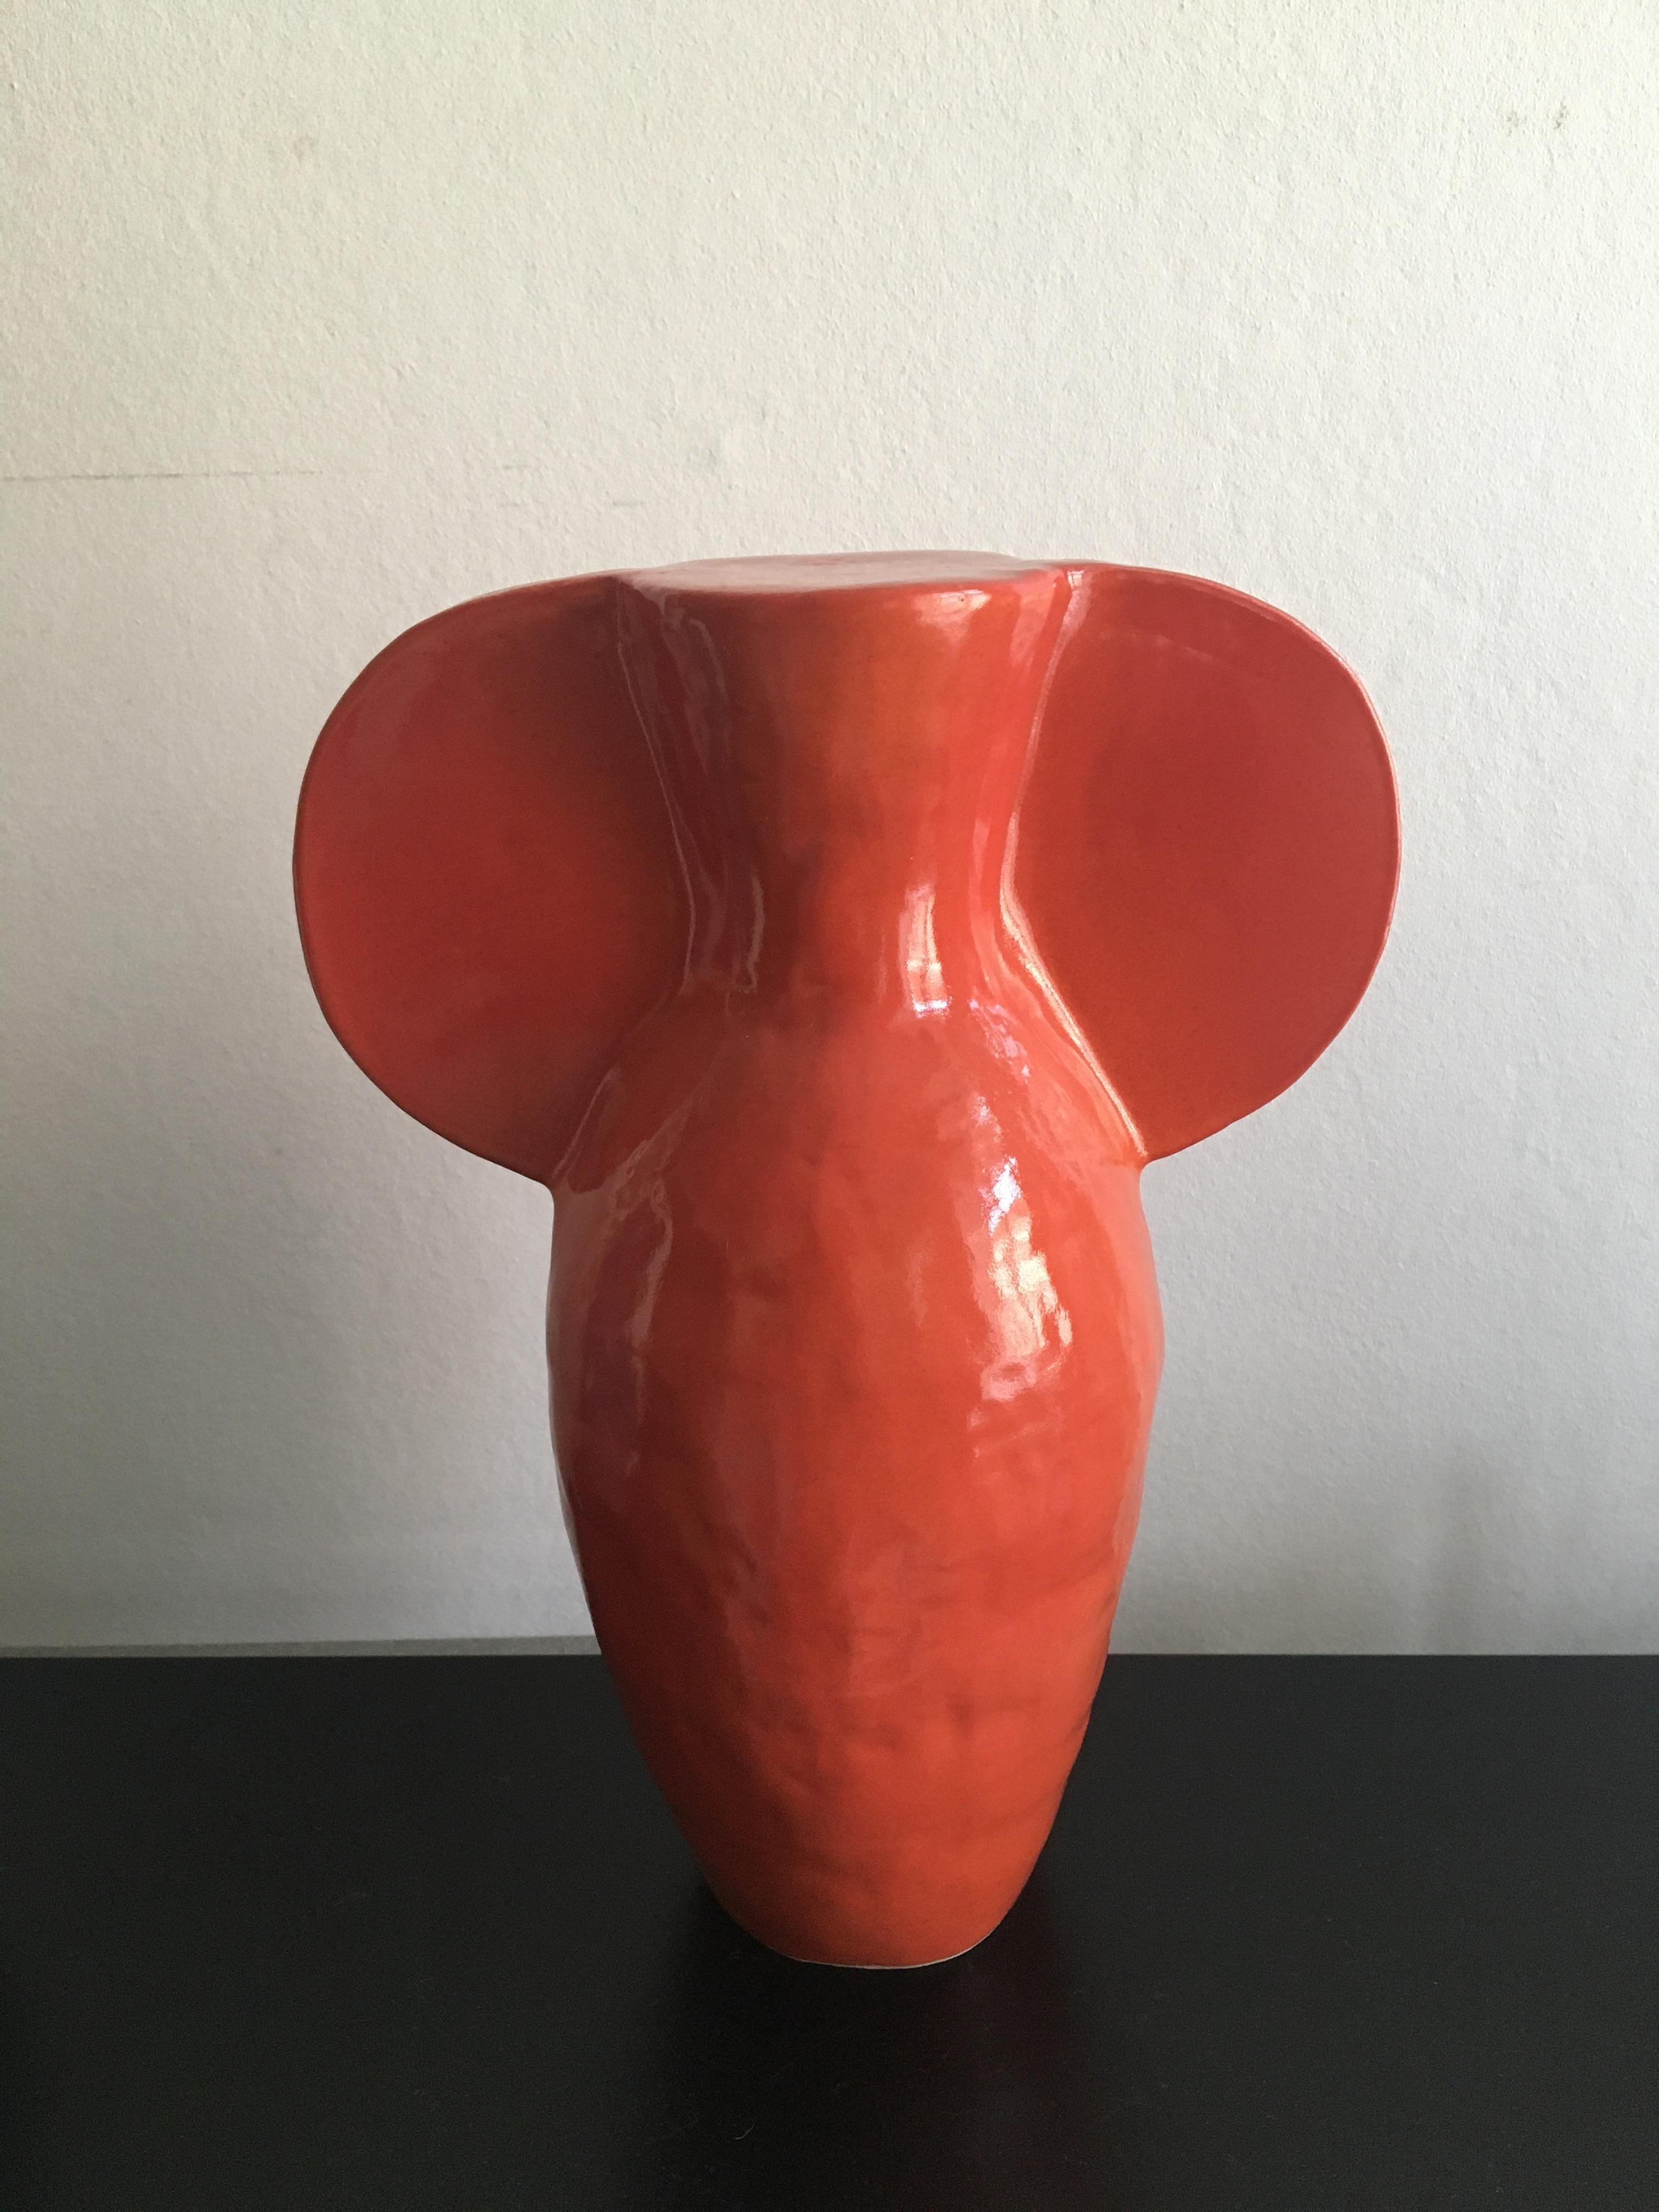 Sculpture vase by Maria Lenskjold
Dimensions: H 27 cm
Materials: Stoneware

Maria Lenskjold’s practice is based on a consistent principle; to investigate and interact with the common pictorial artistic categories and challenge them in playful